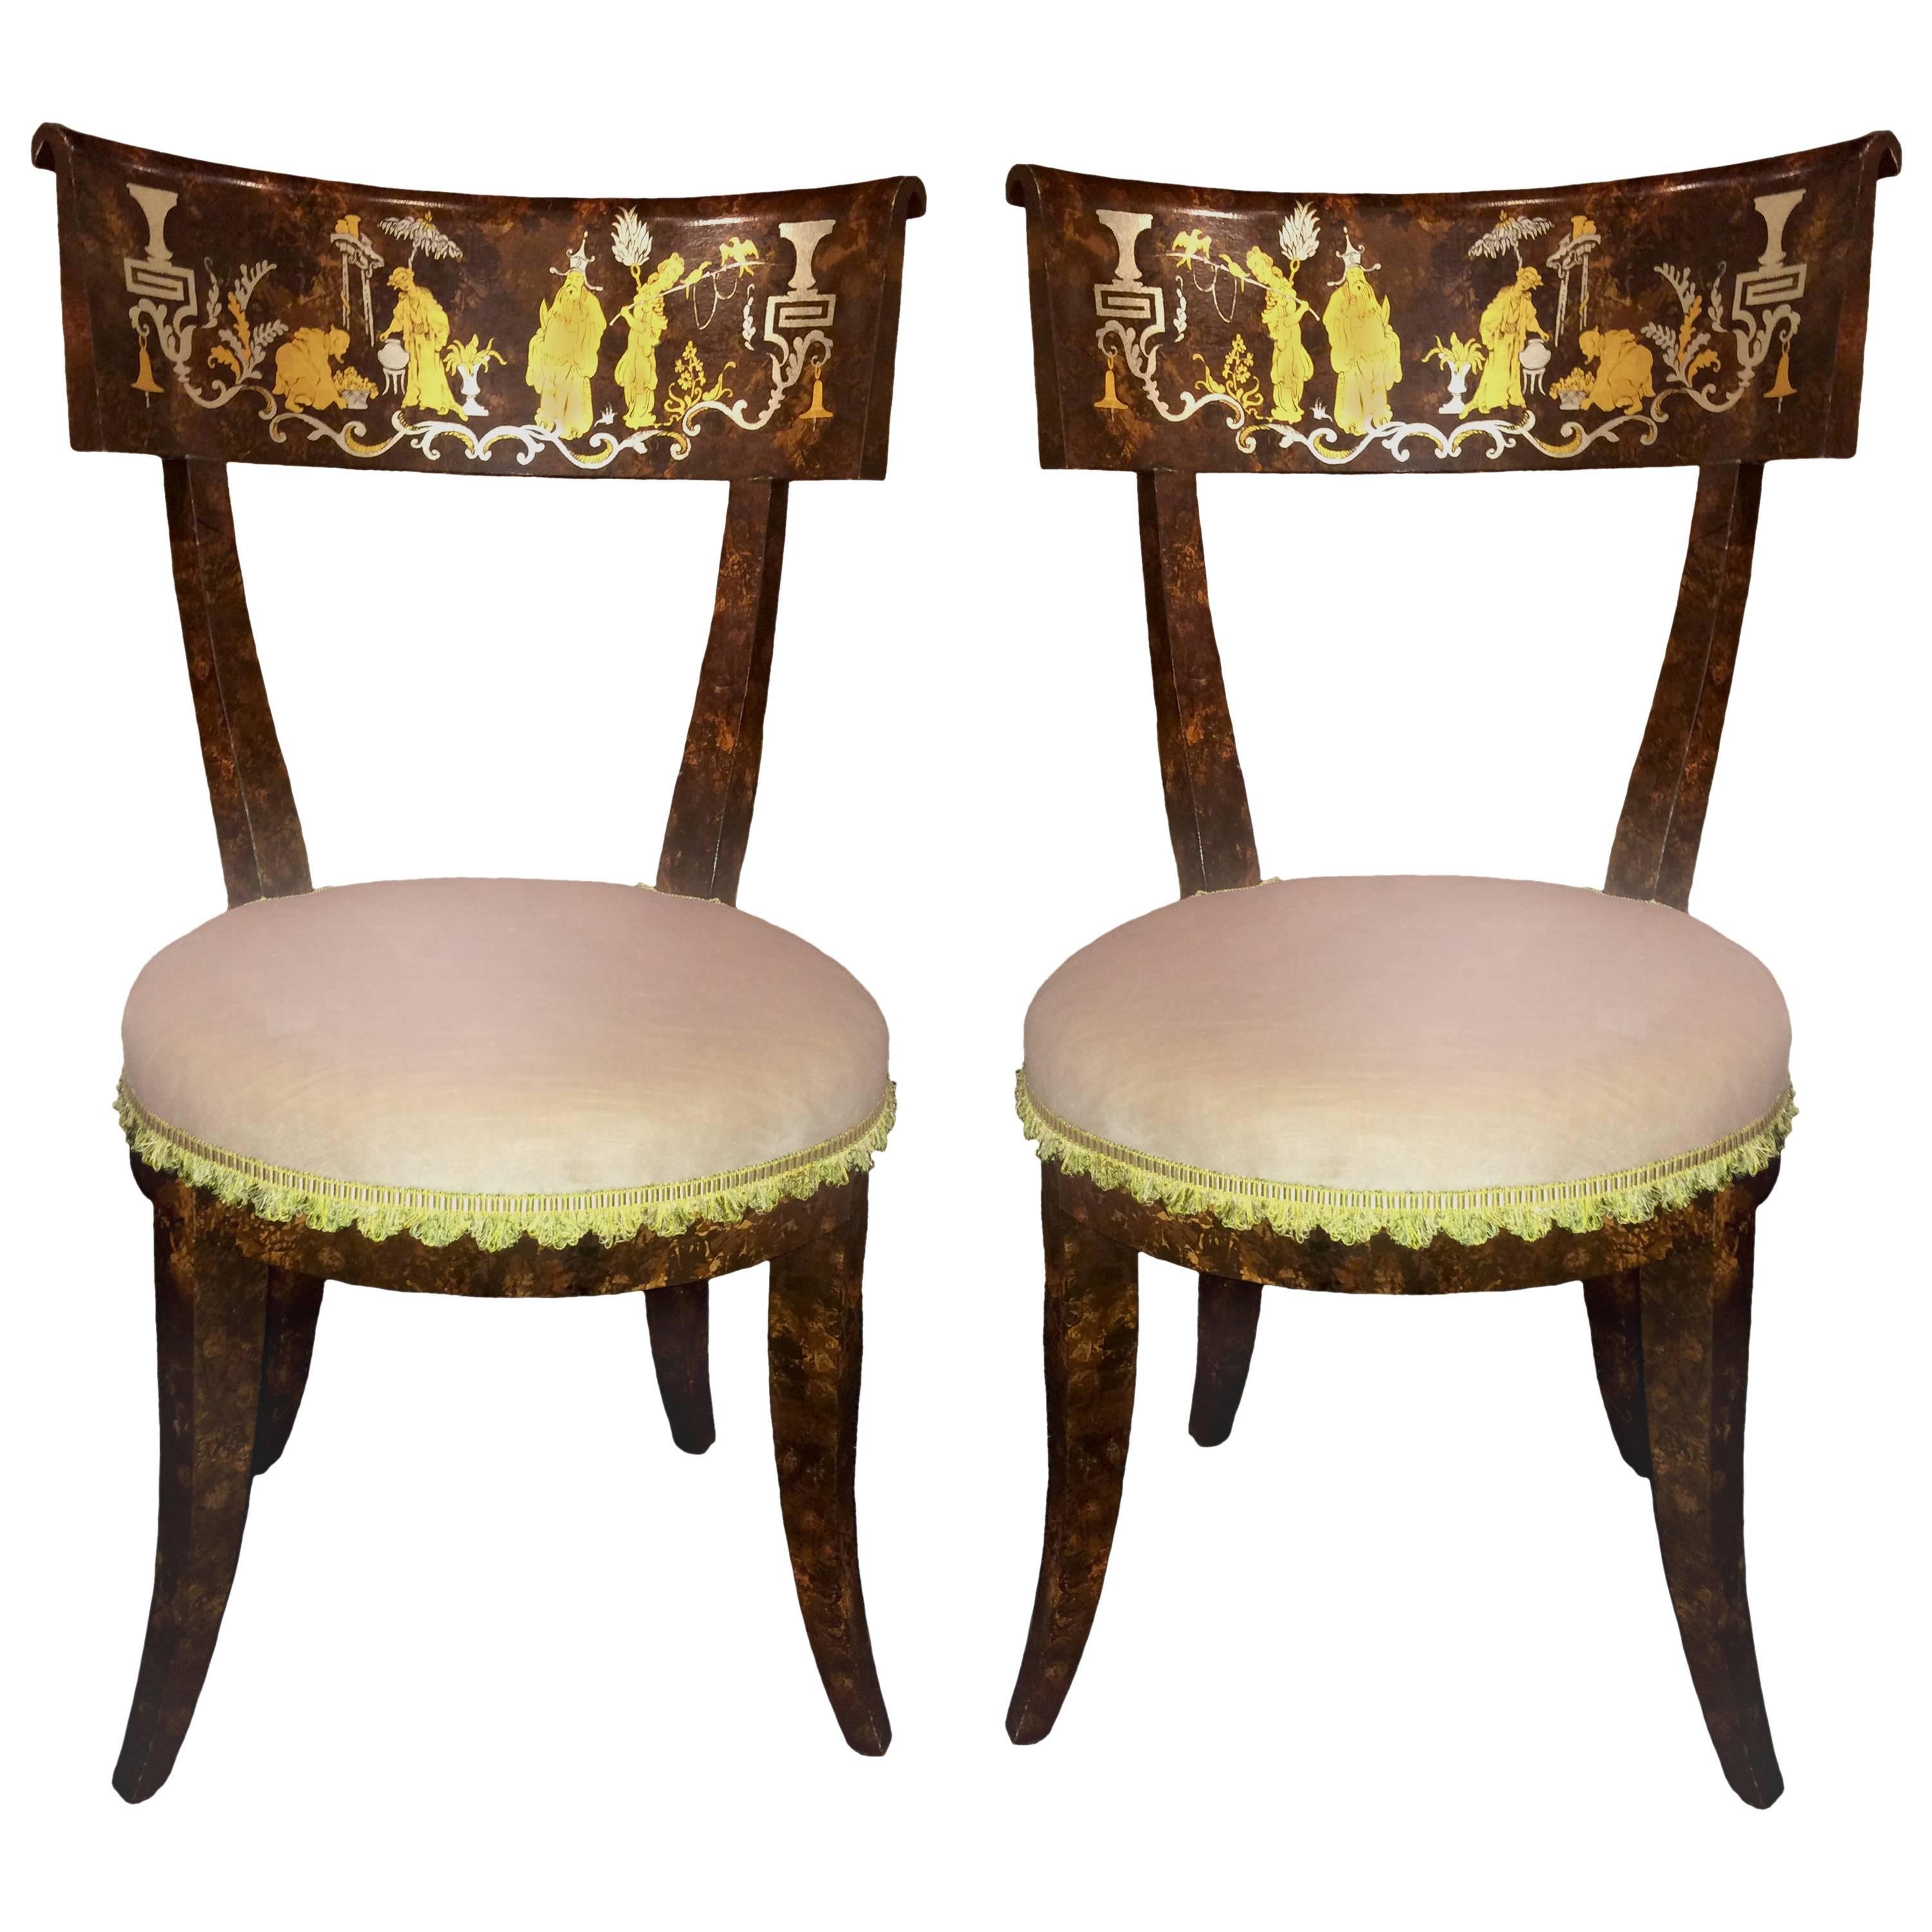 SALE Klismos Style Faux-Tortoise Painted Chinoiserie Chairs, Pair